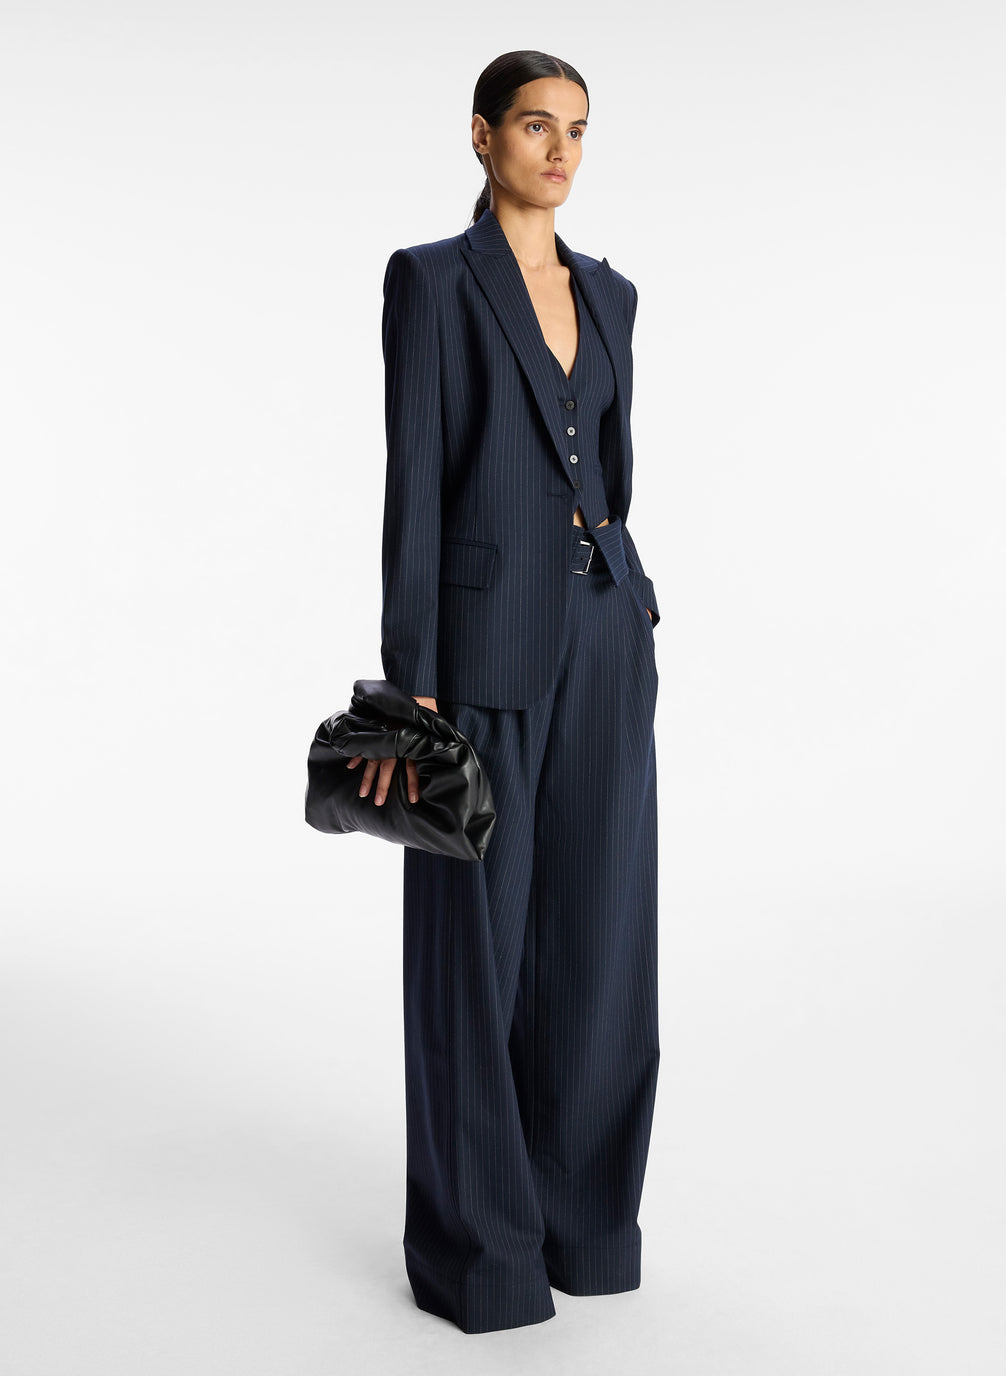 side  view of woman wearing navy blue pinstripe suit comprised of blazer, vest, and fold over wide leg pants